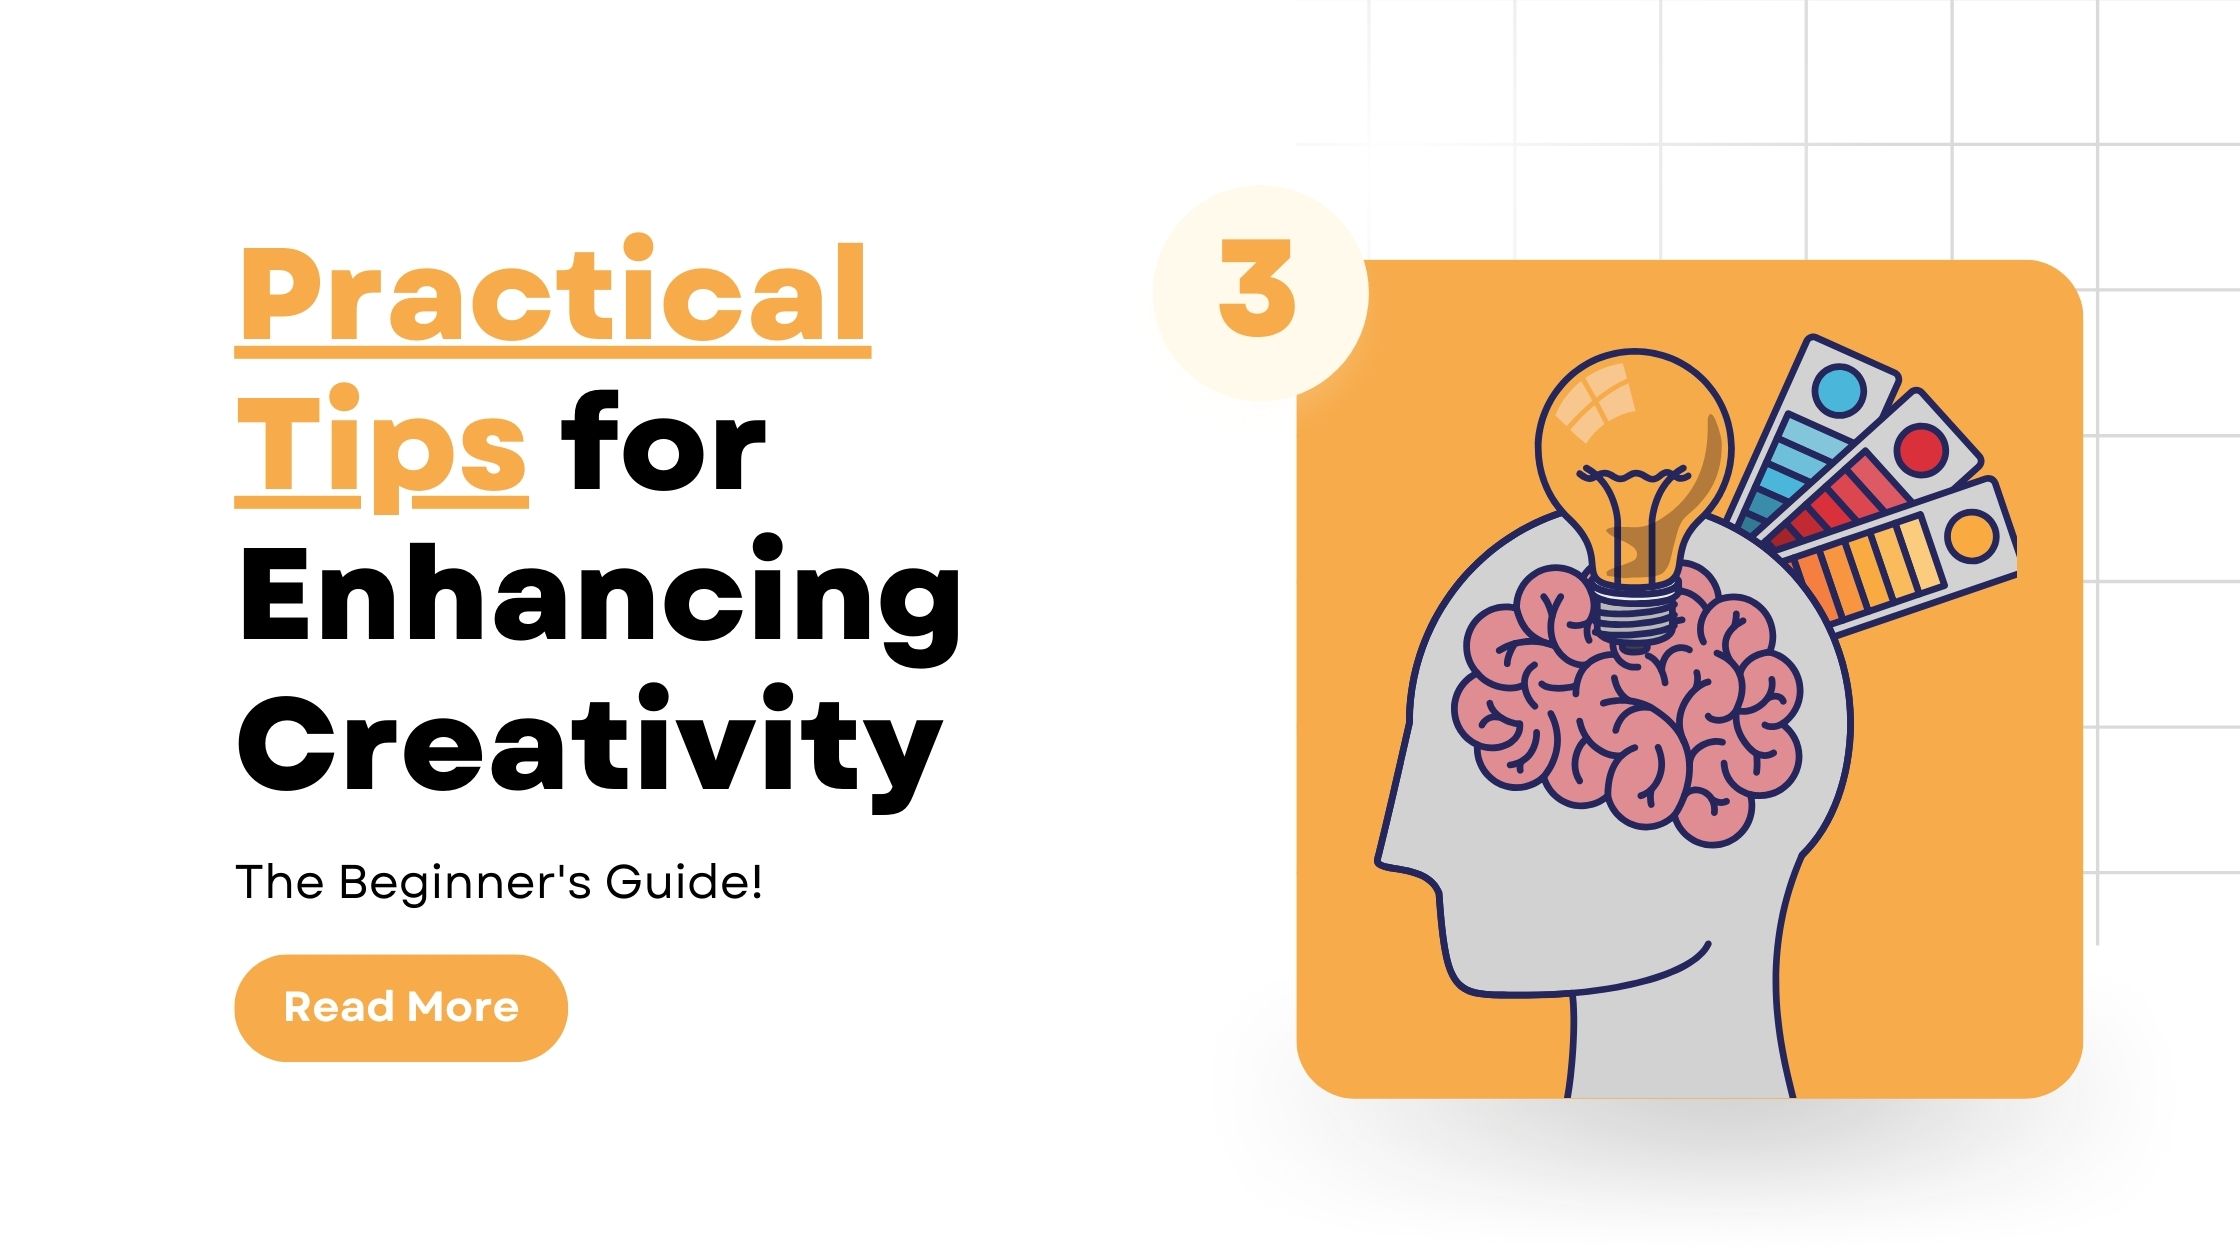 The image shows the text "Practical Tips for Enhancing Creativity. The Beginner's Guide" with a light bulb and color swatches on top of a person's head.